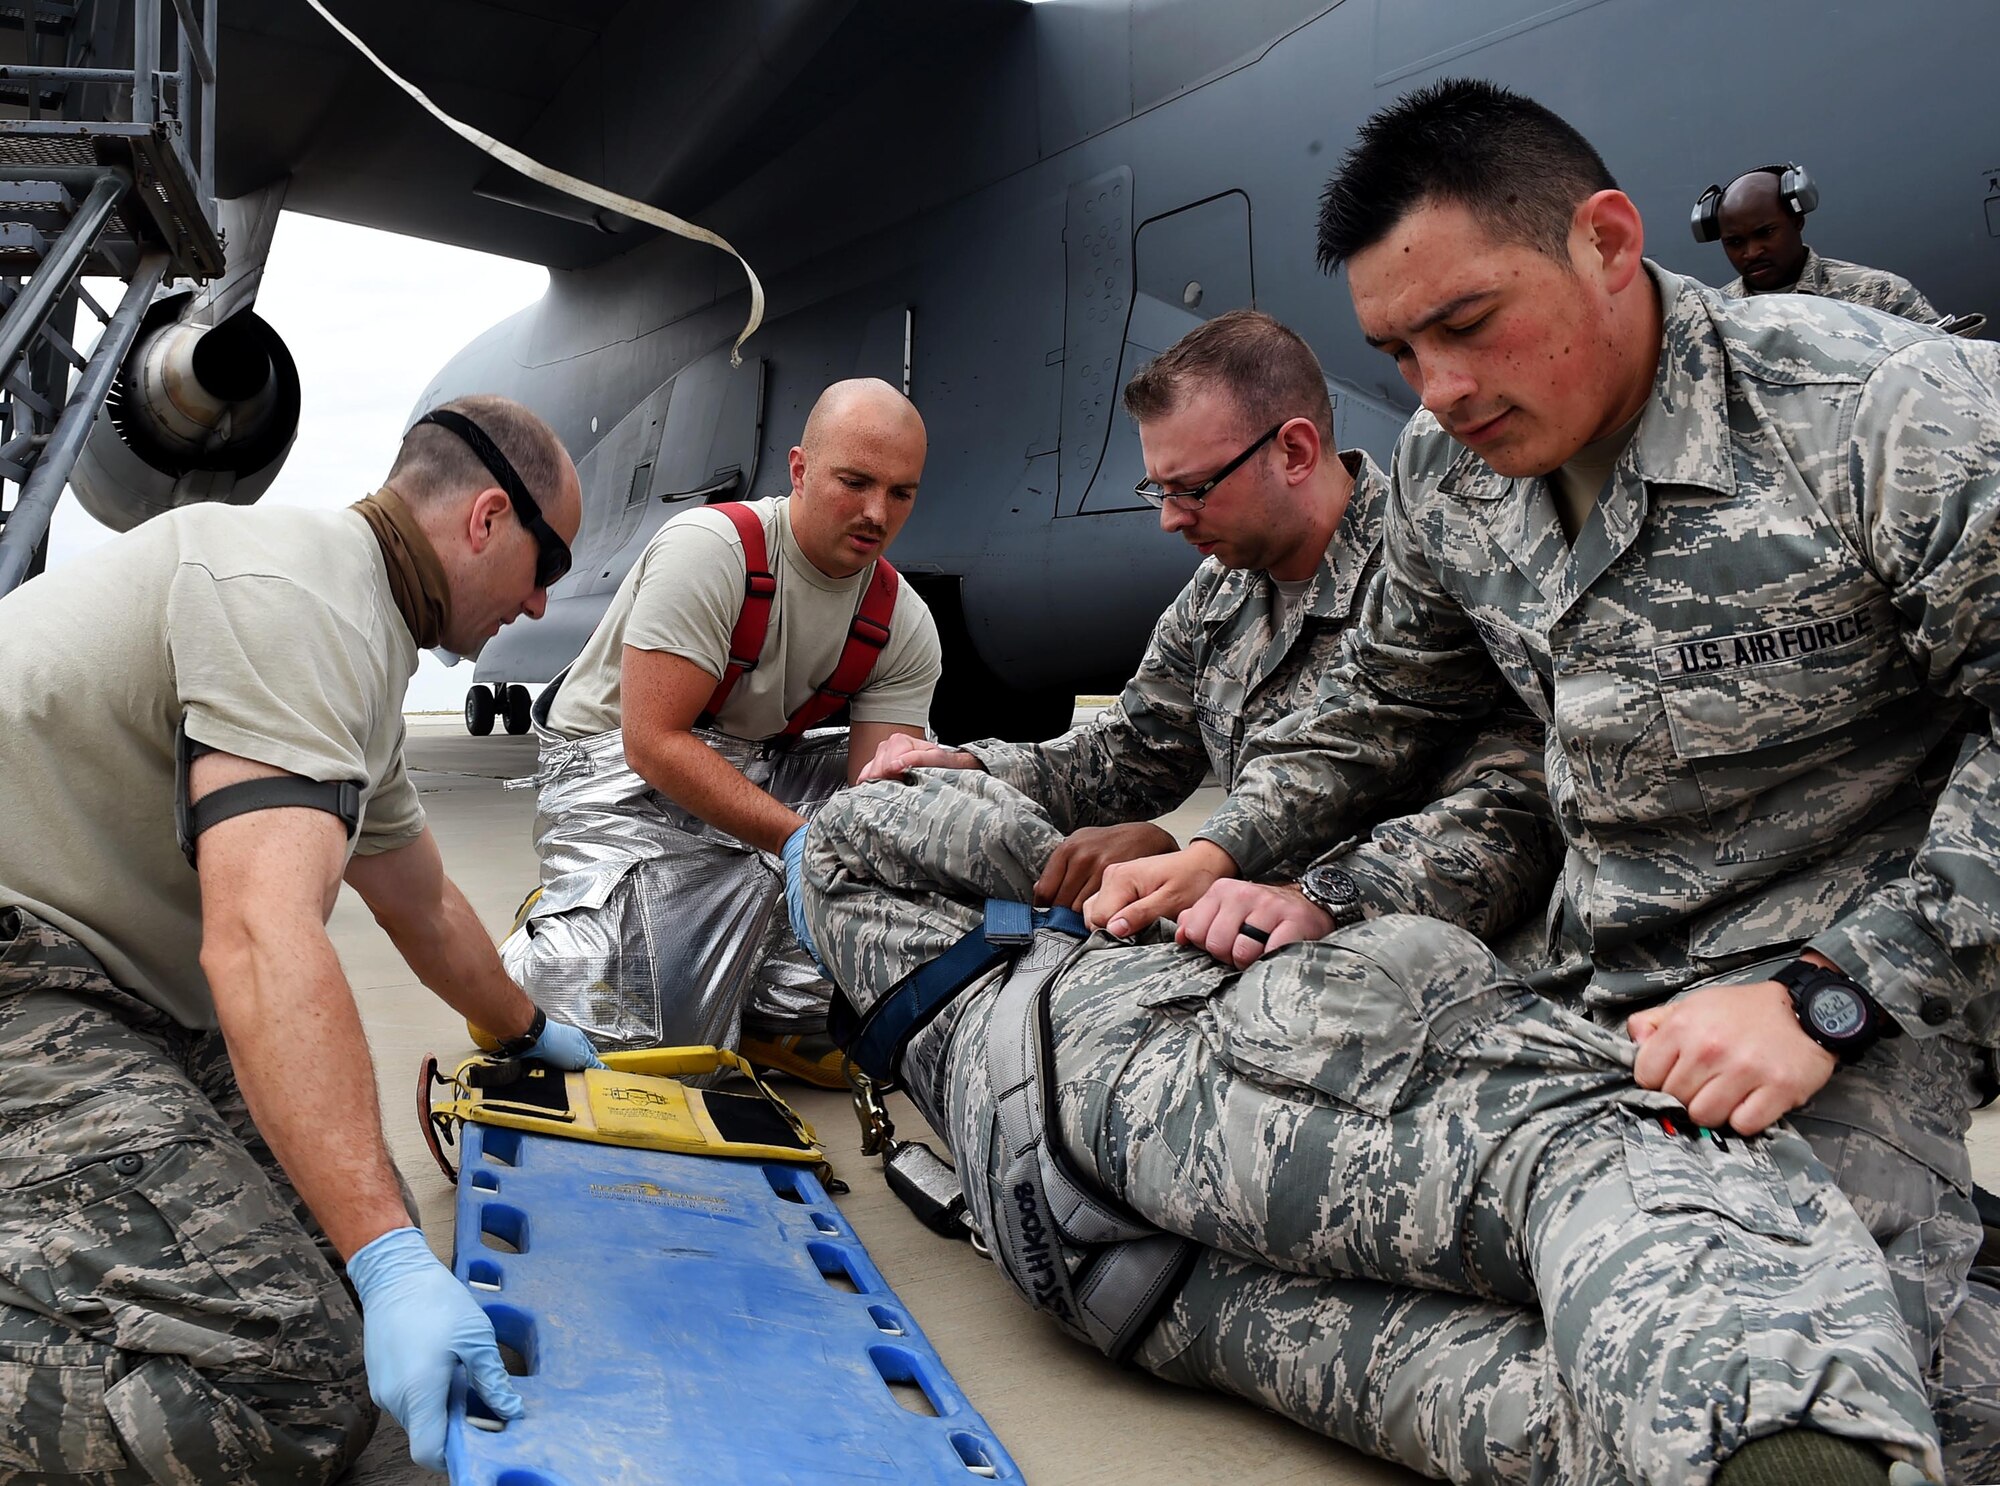 Firefighters and medics from the 386th Air Expeditionary Wing transfer a mock casualty onto a back board during a fall protection exercise on the flightline at an undisclosed location in Southwest Asia, March, 14, 2016. The purpose of the exercise was to demonstrate the ability for 5th Expeditionary Aircraft Maintenance Squadron personnel and 386th emergency responders to recover an individual who has fallen at a work site. (U.S. Air Force photo by Staff Sgt. Jerilyn Quintanilla)